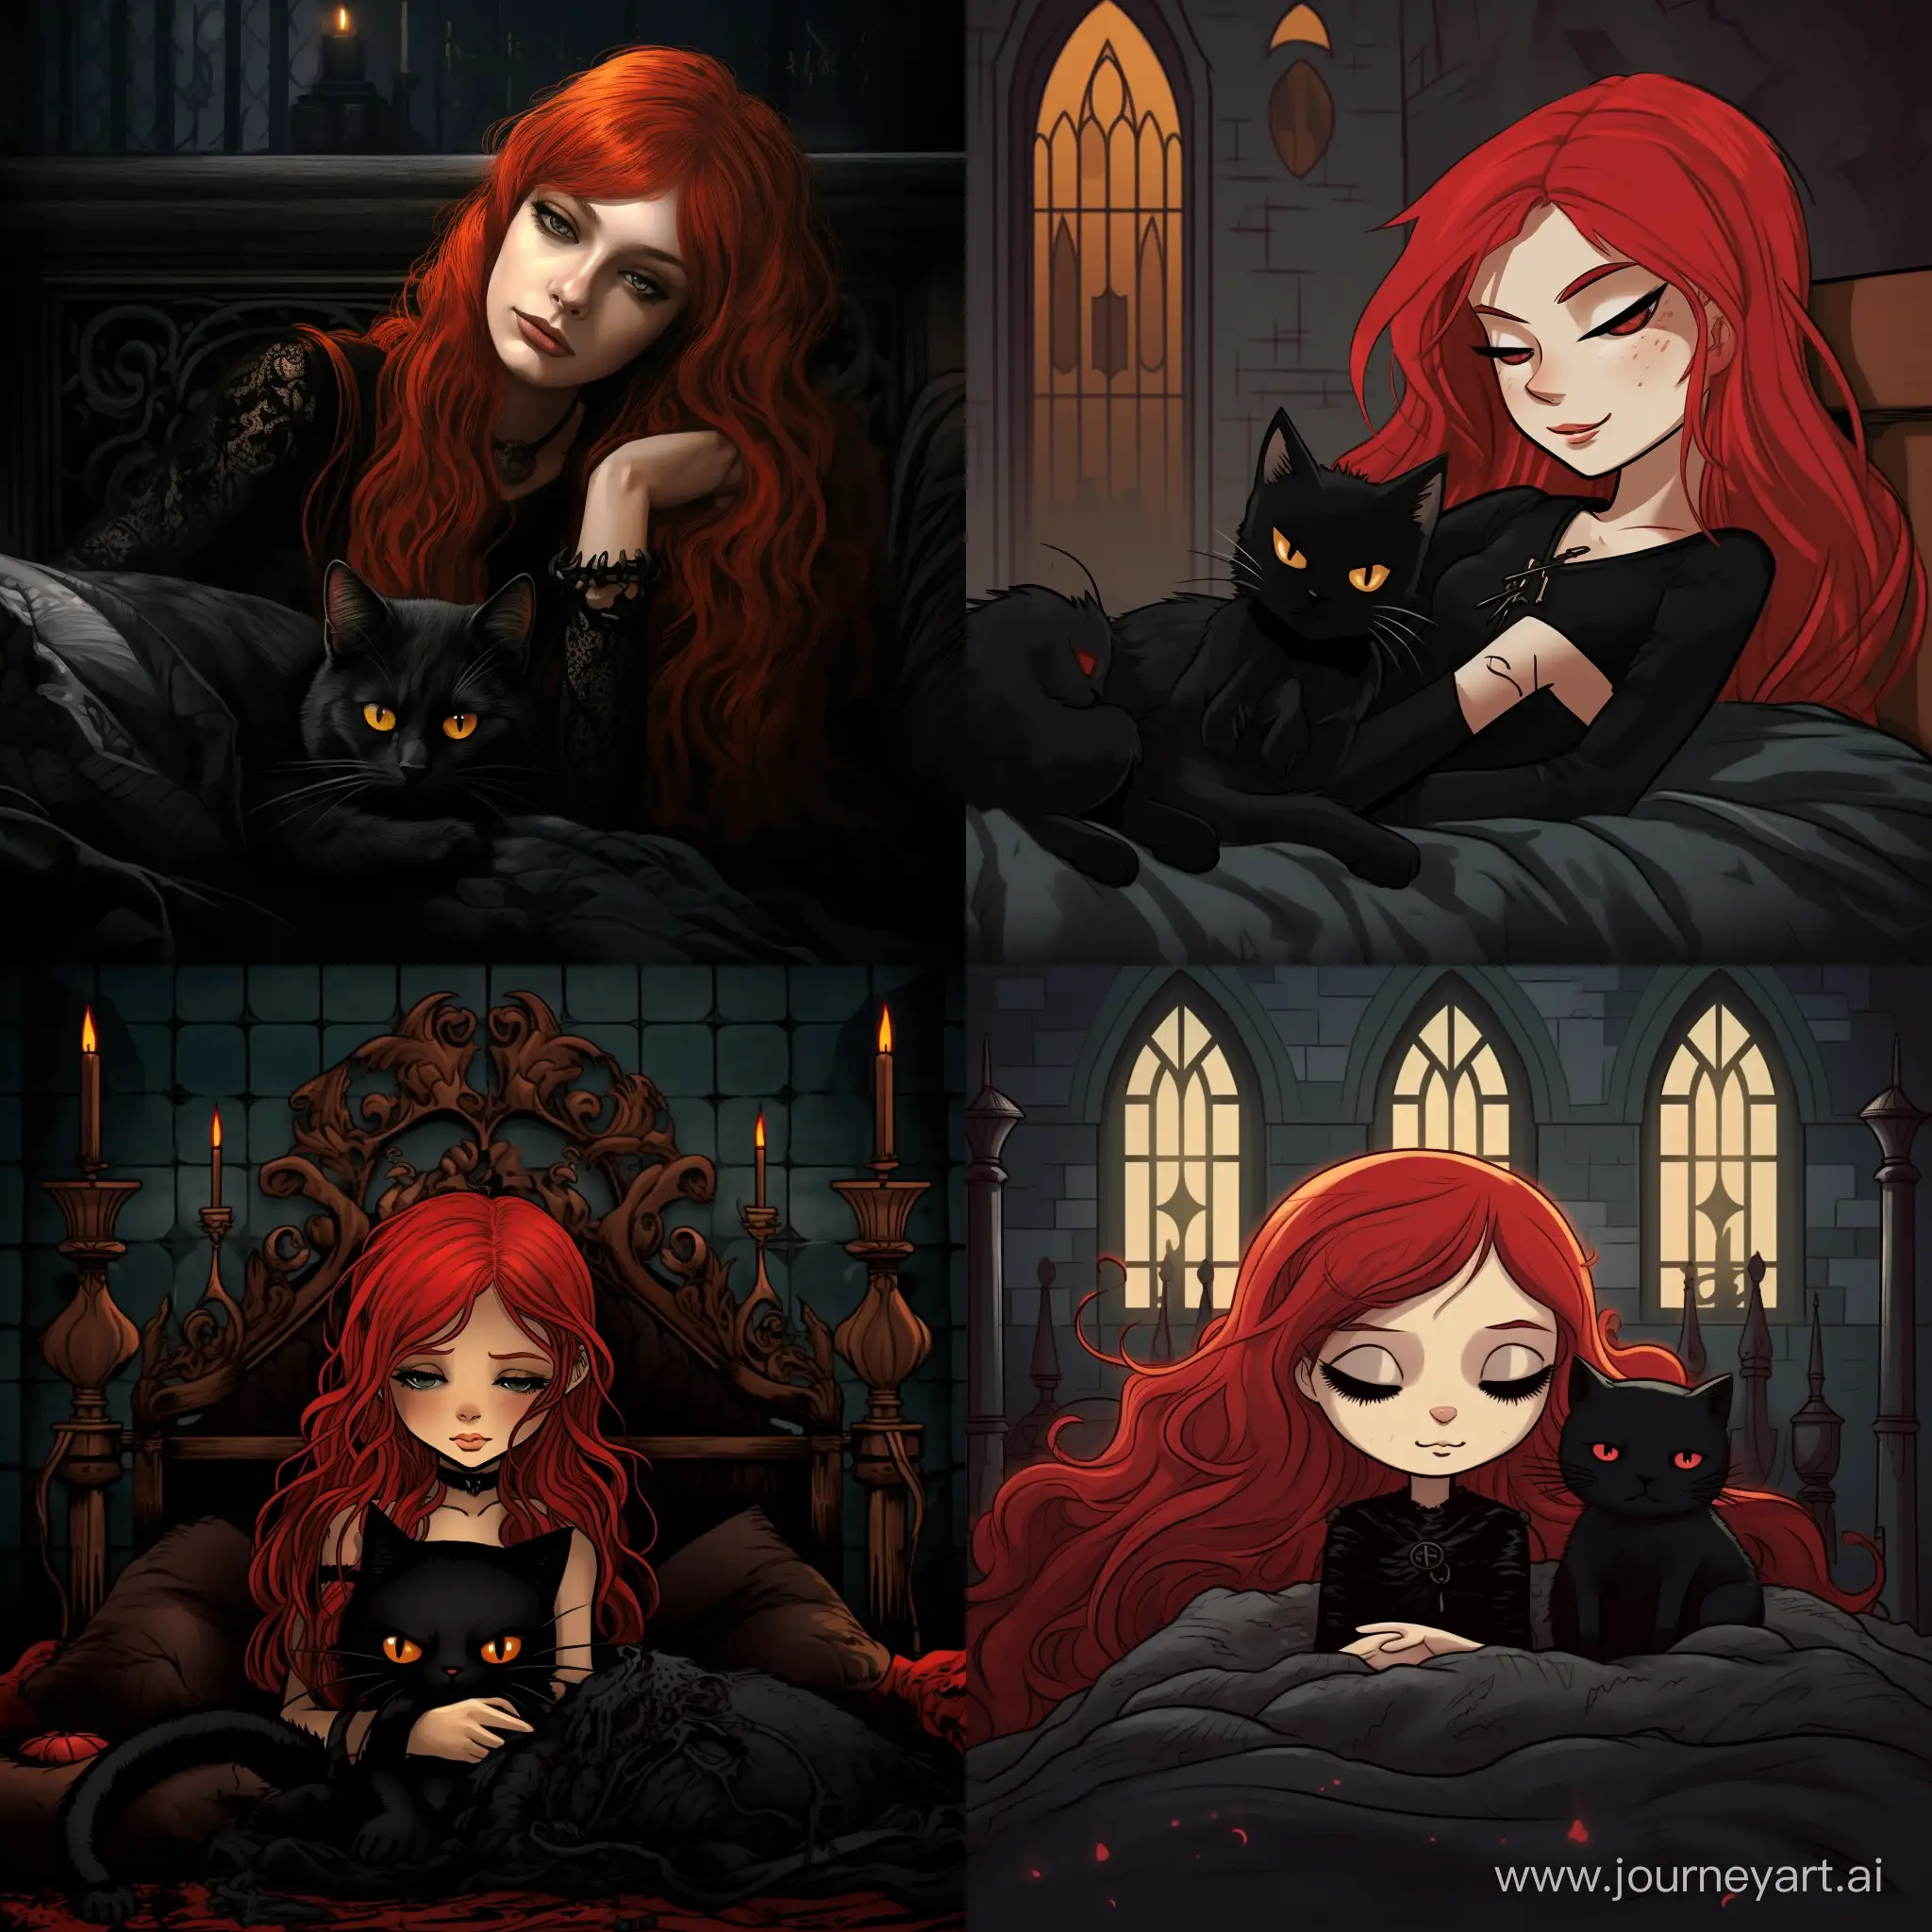 RedHaired-Gothic-Girl-Sleeping-with-Gothic-Cat-on-Bed